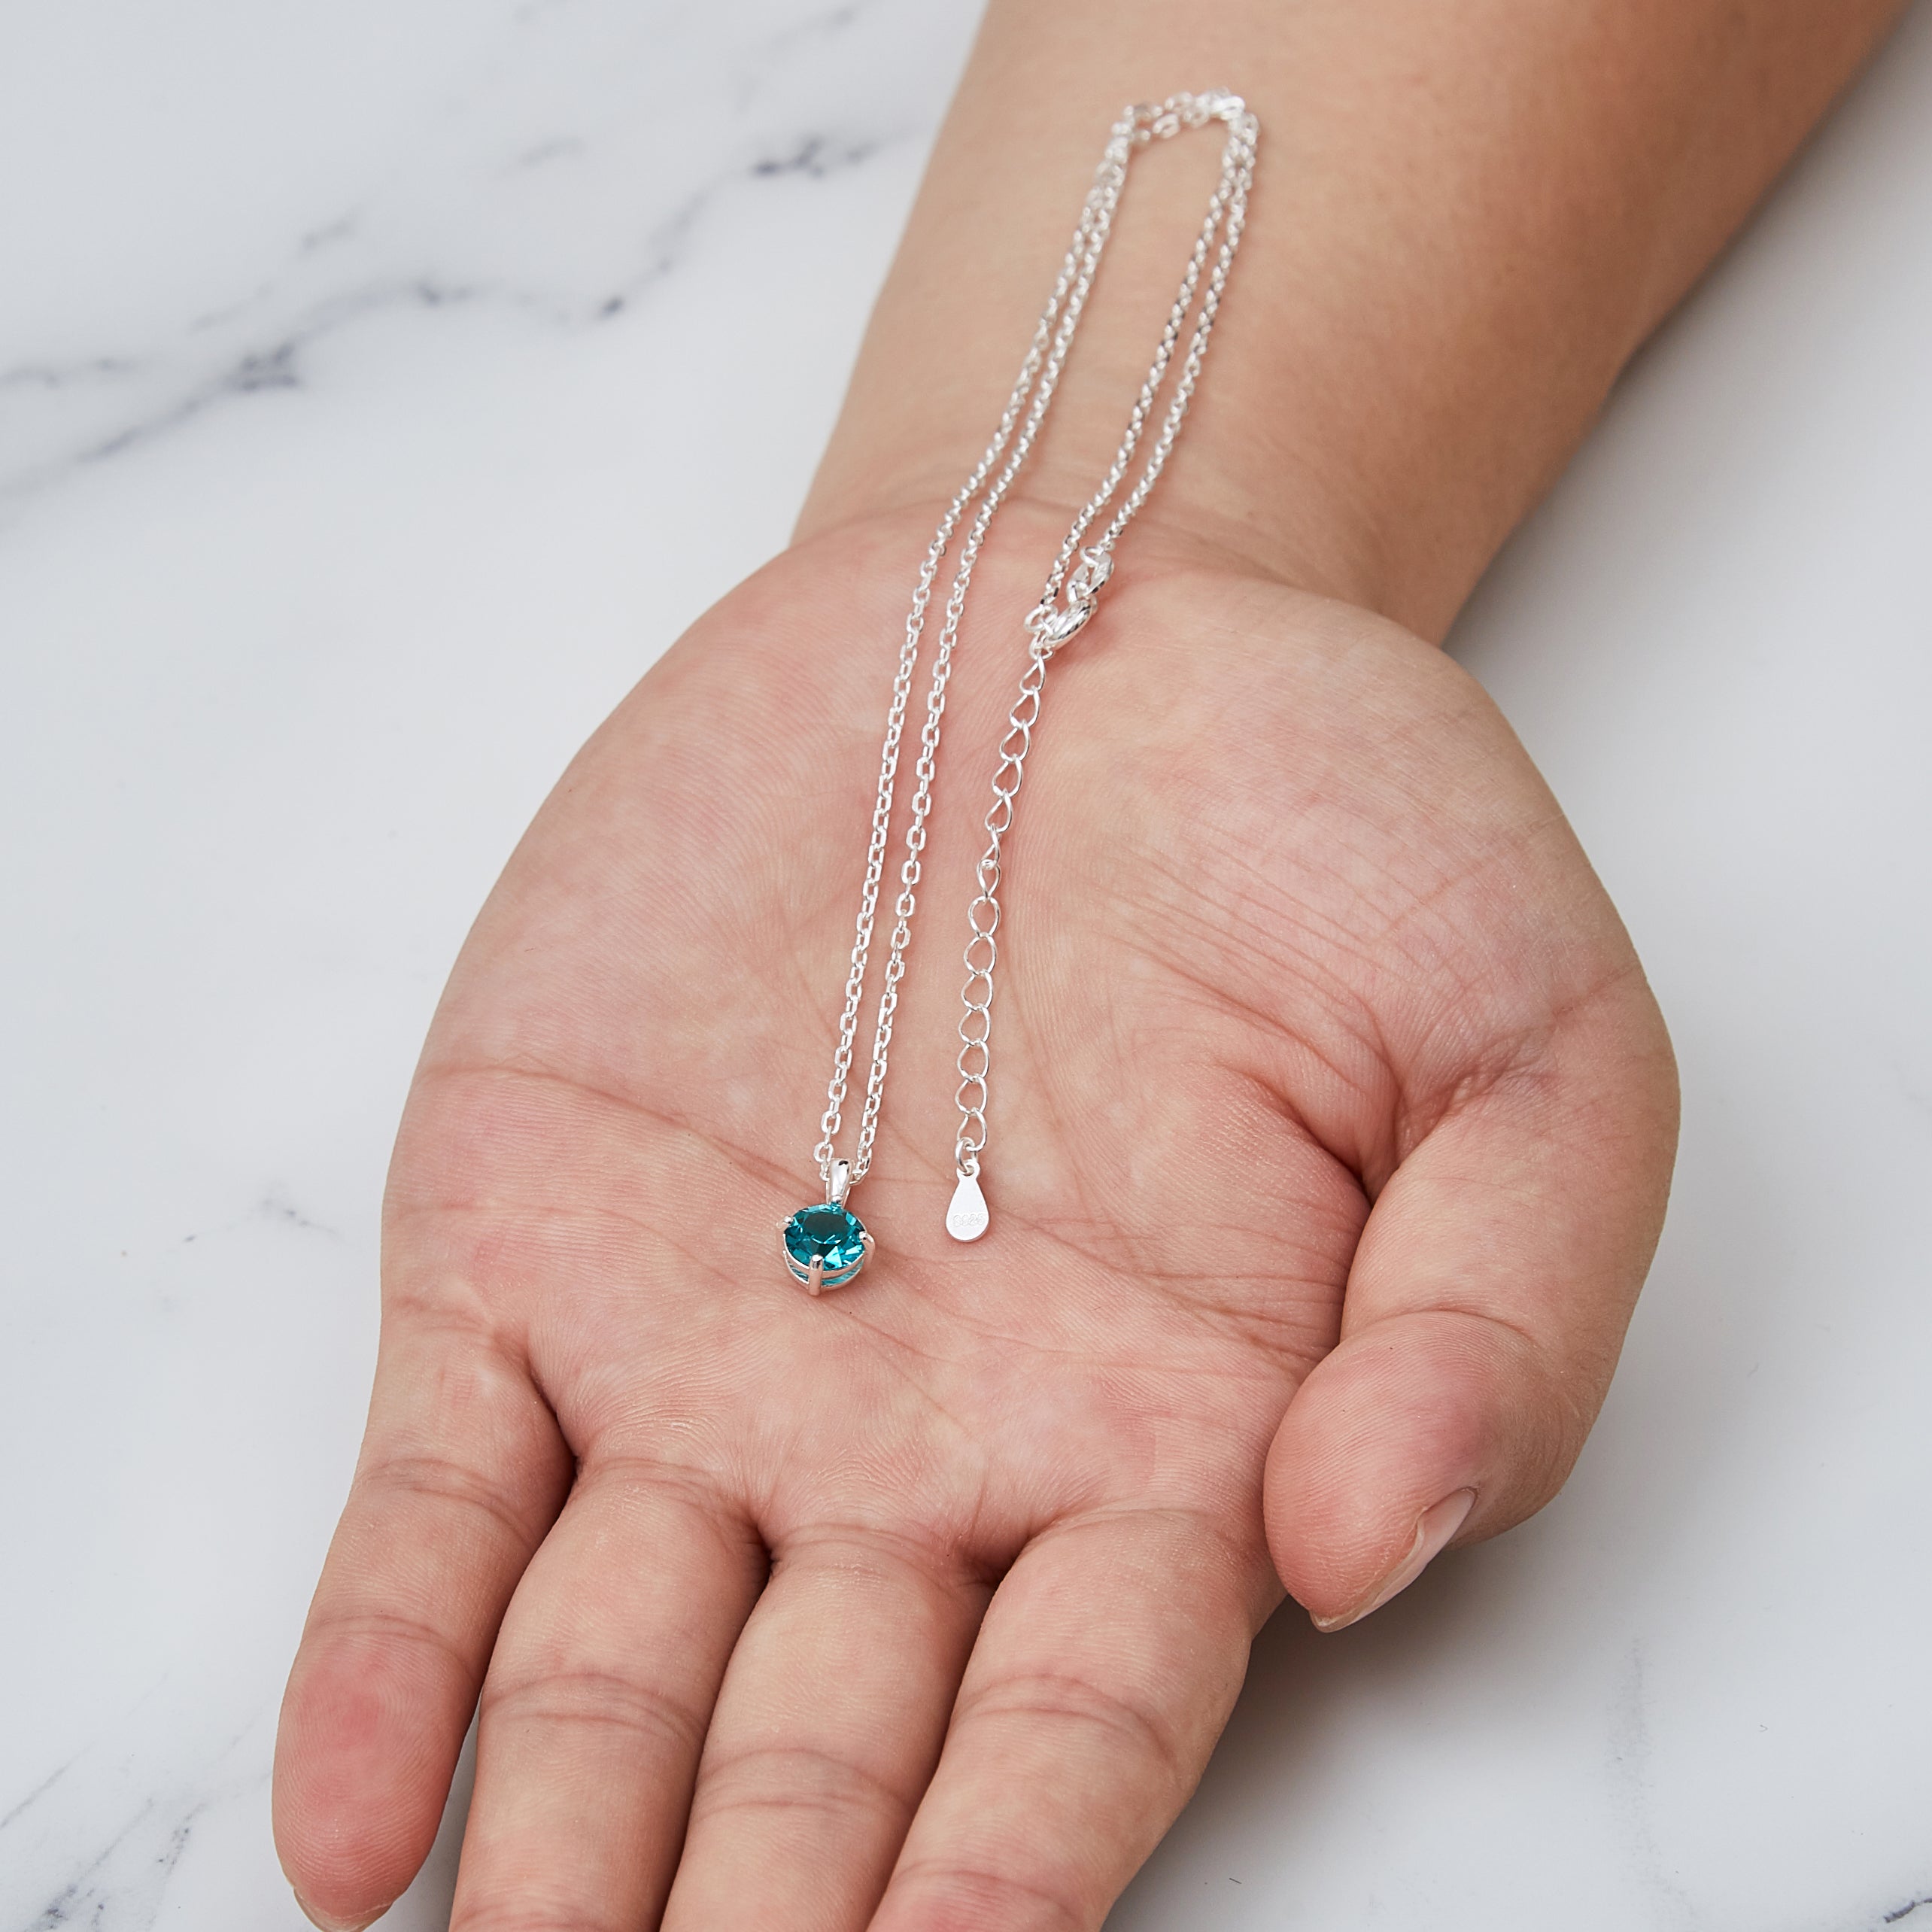 Sterling Silver Blue Necklace Created with Zircondia® Crystals